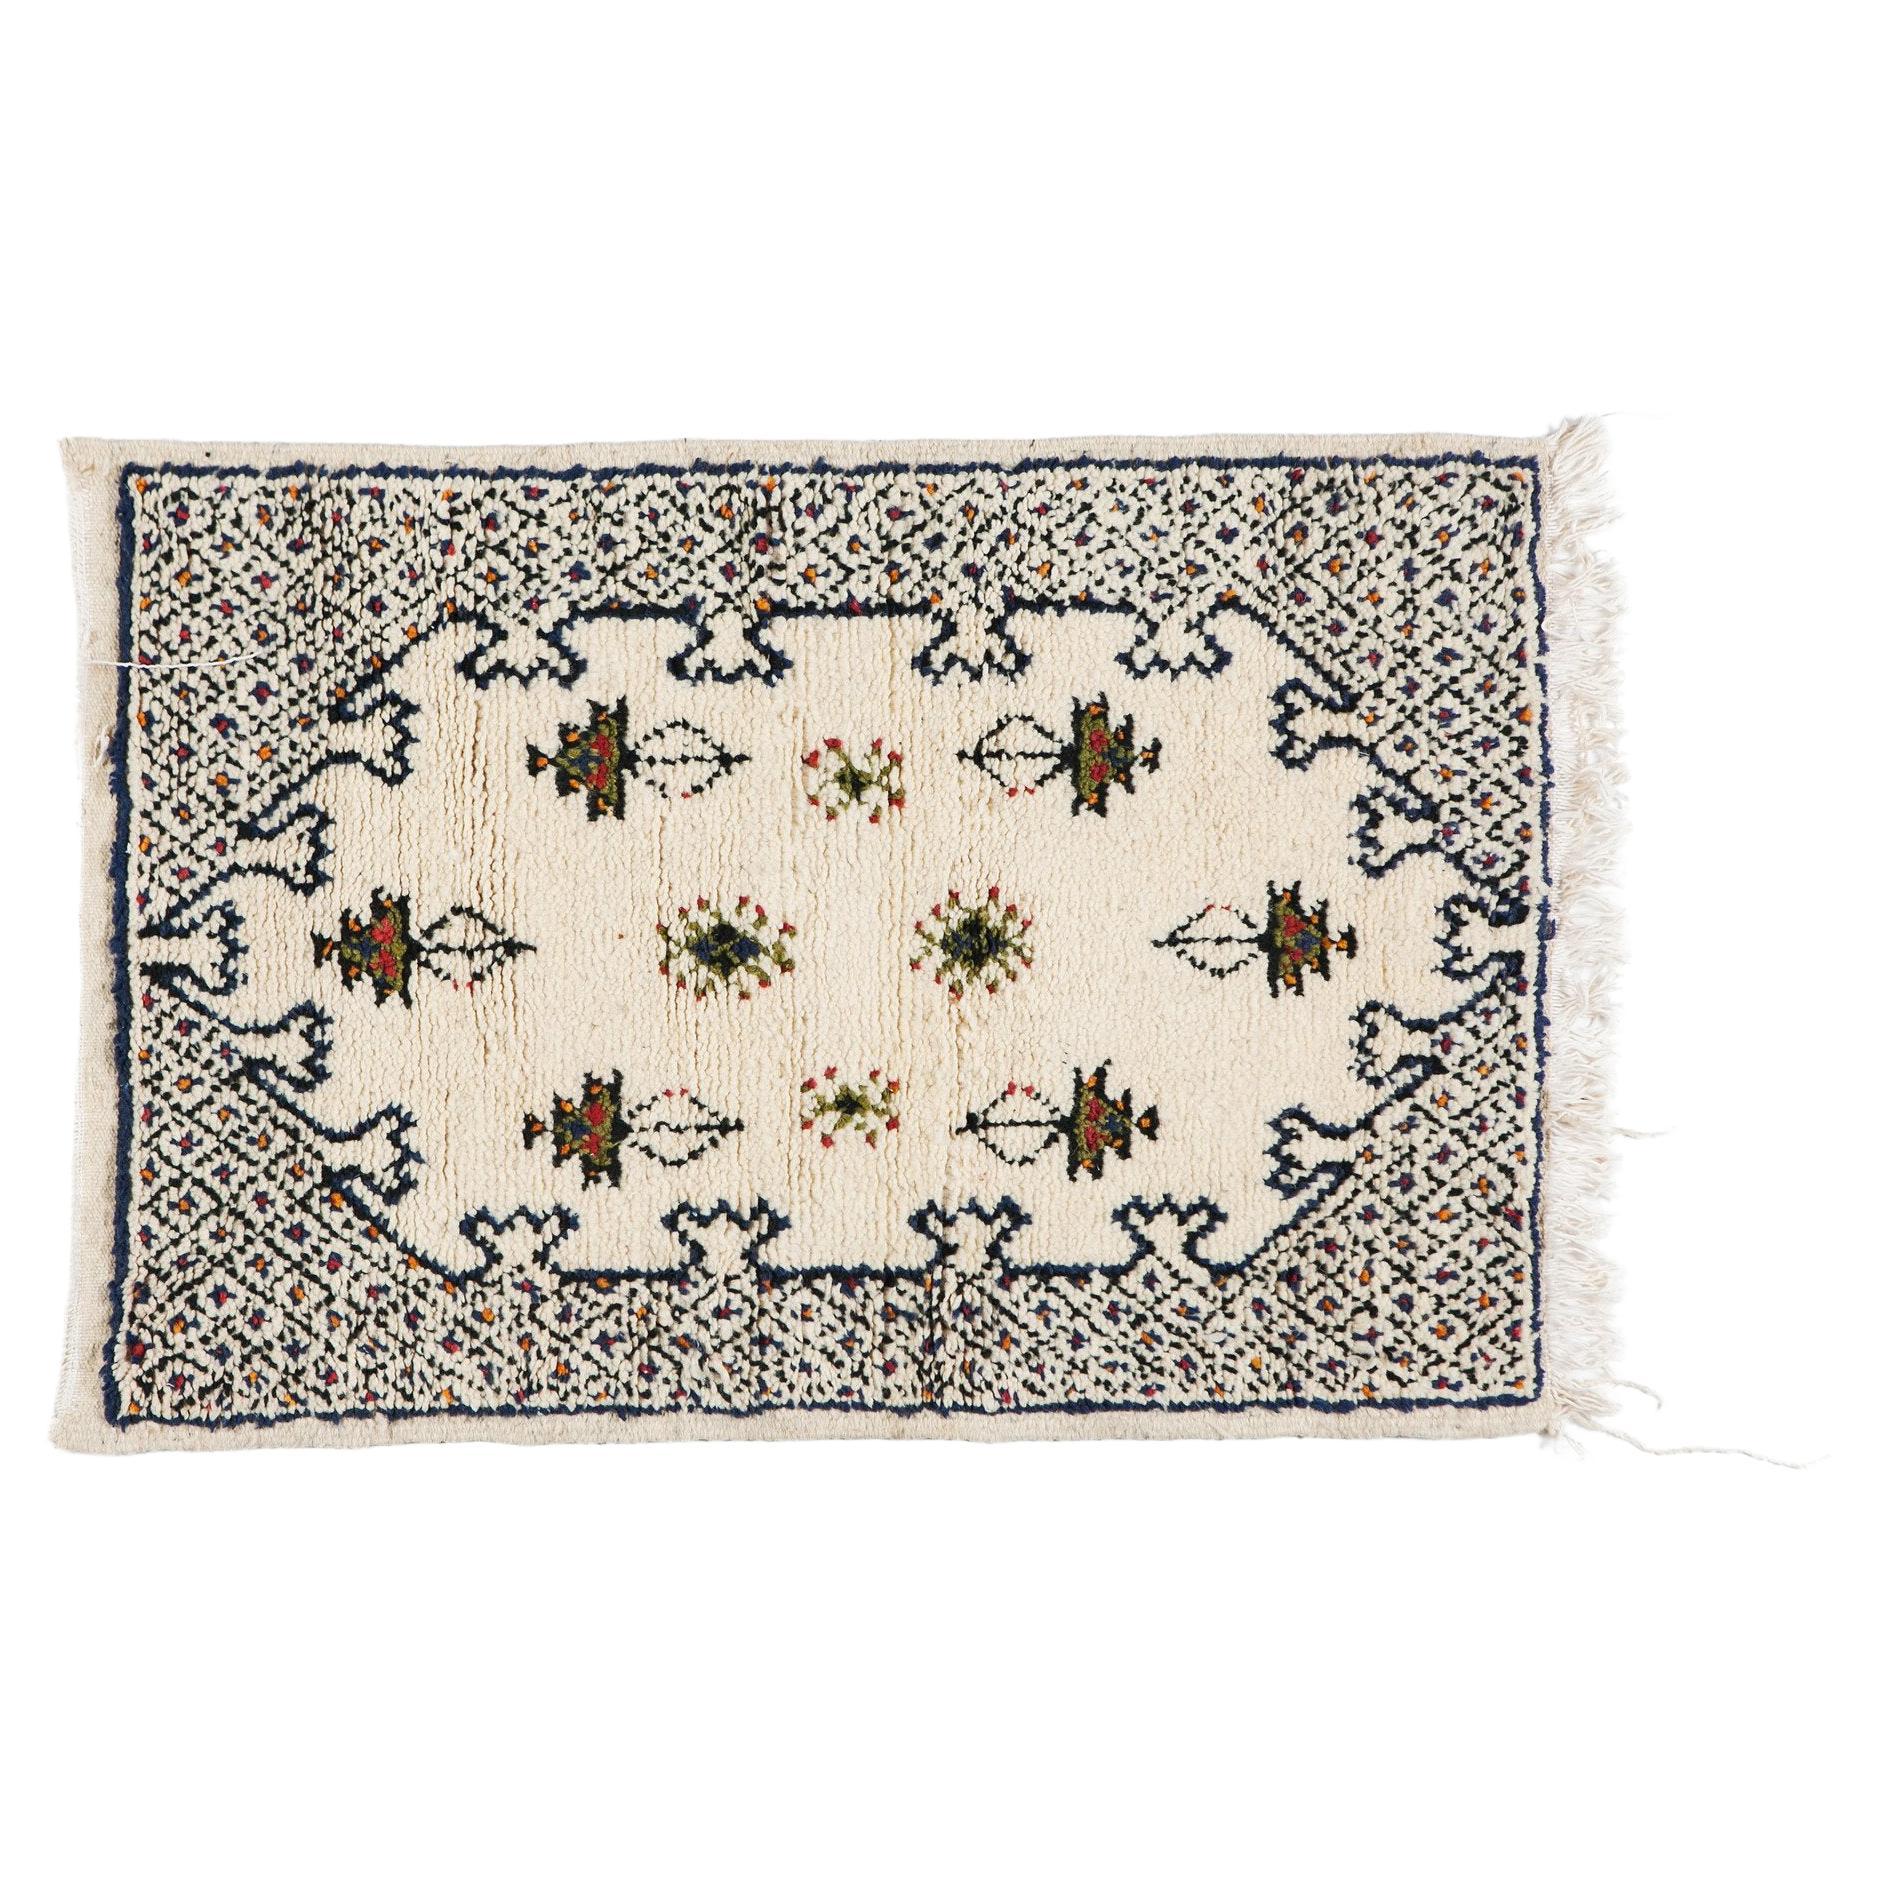 Vintage Boho Chic Tribal Moroccan Small White Wool Hand-Woven Rug or Carpet 